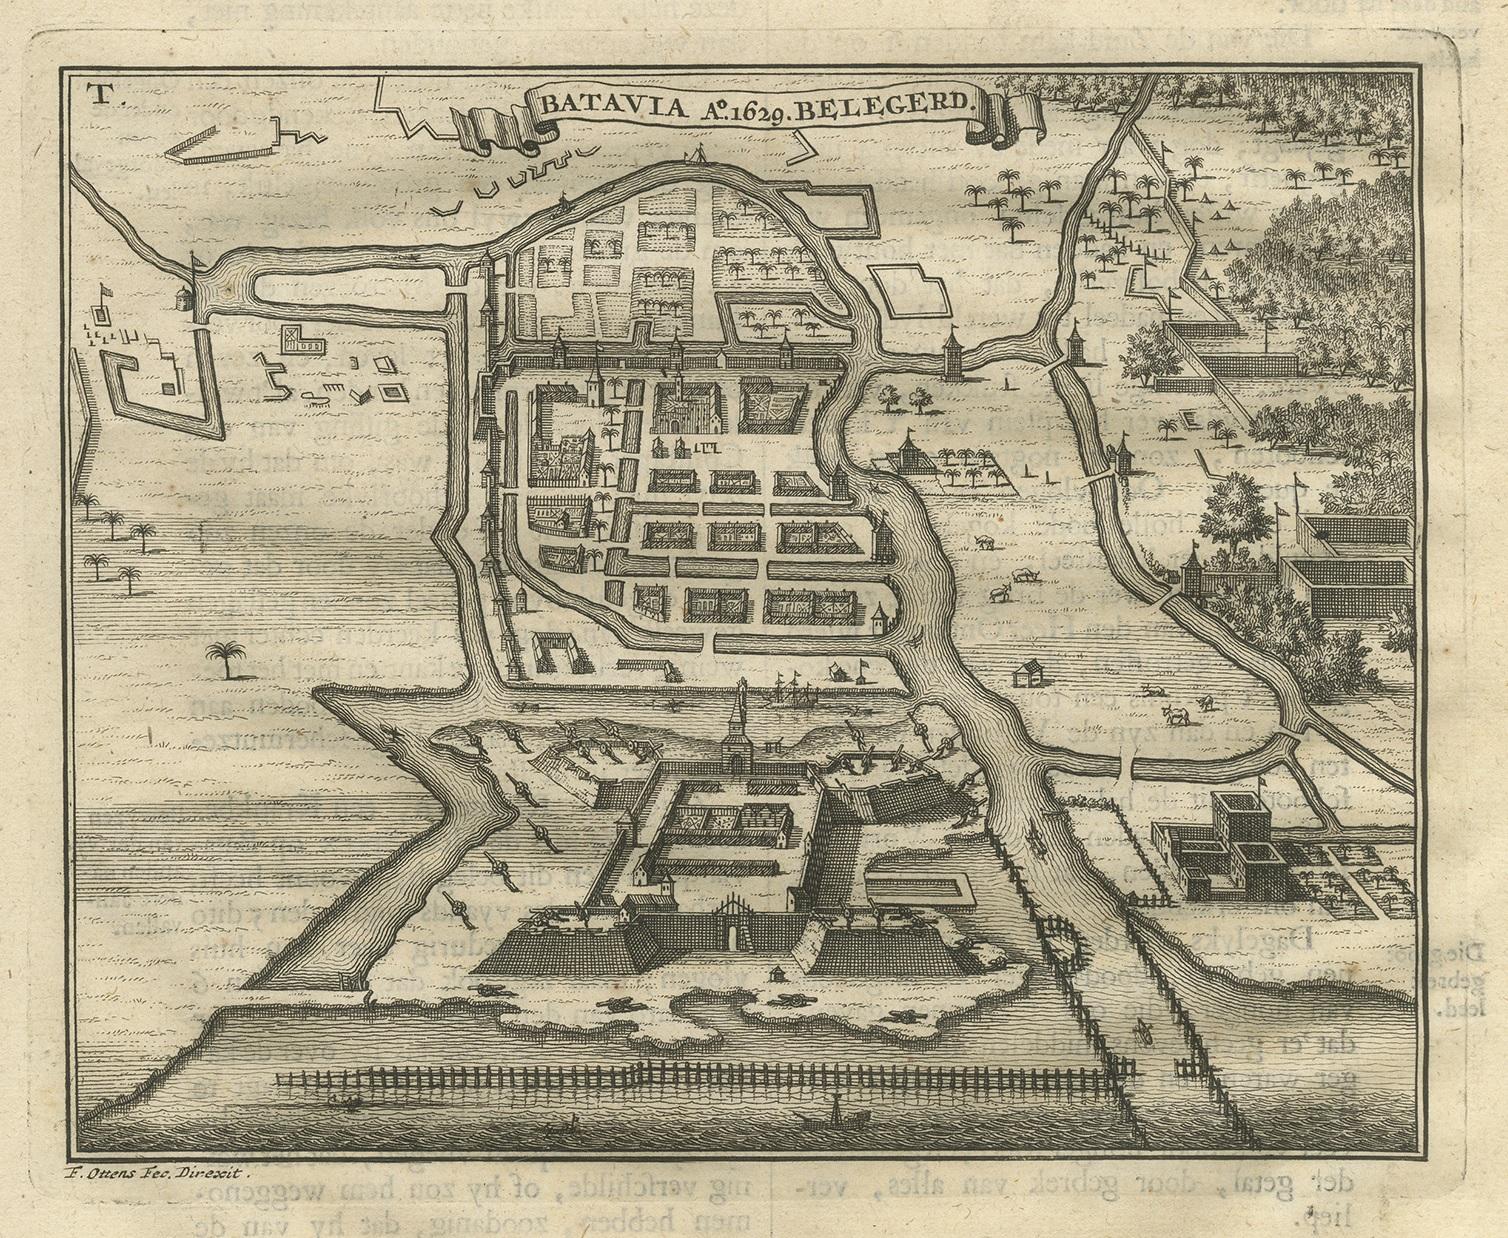 Antique print titled 'Batavia belegerd'. This print depicts the siege of Batavia, Indonesia, in 1629. This print originates from 'Oud en Nieuw Oost-Indiën' by F. Valentijn.